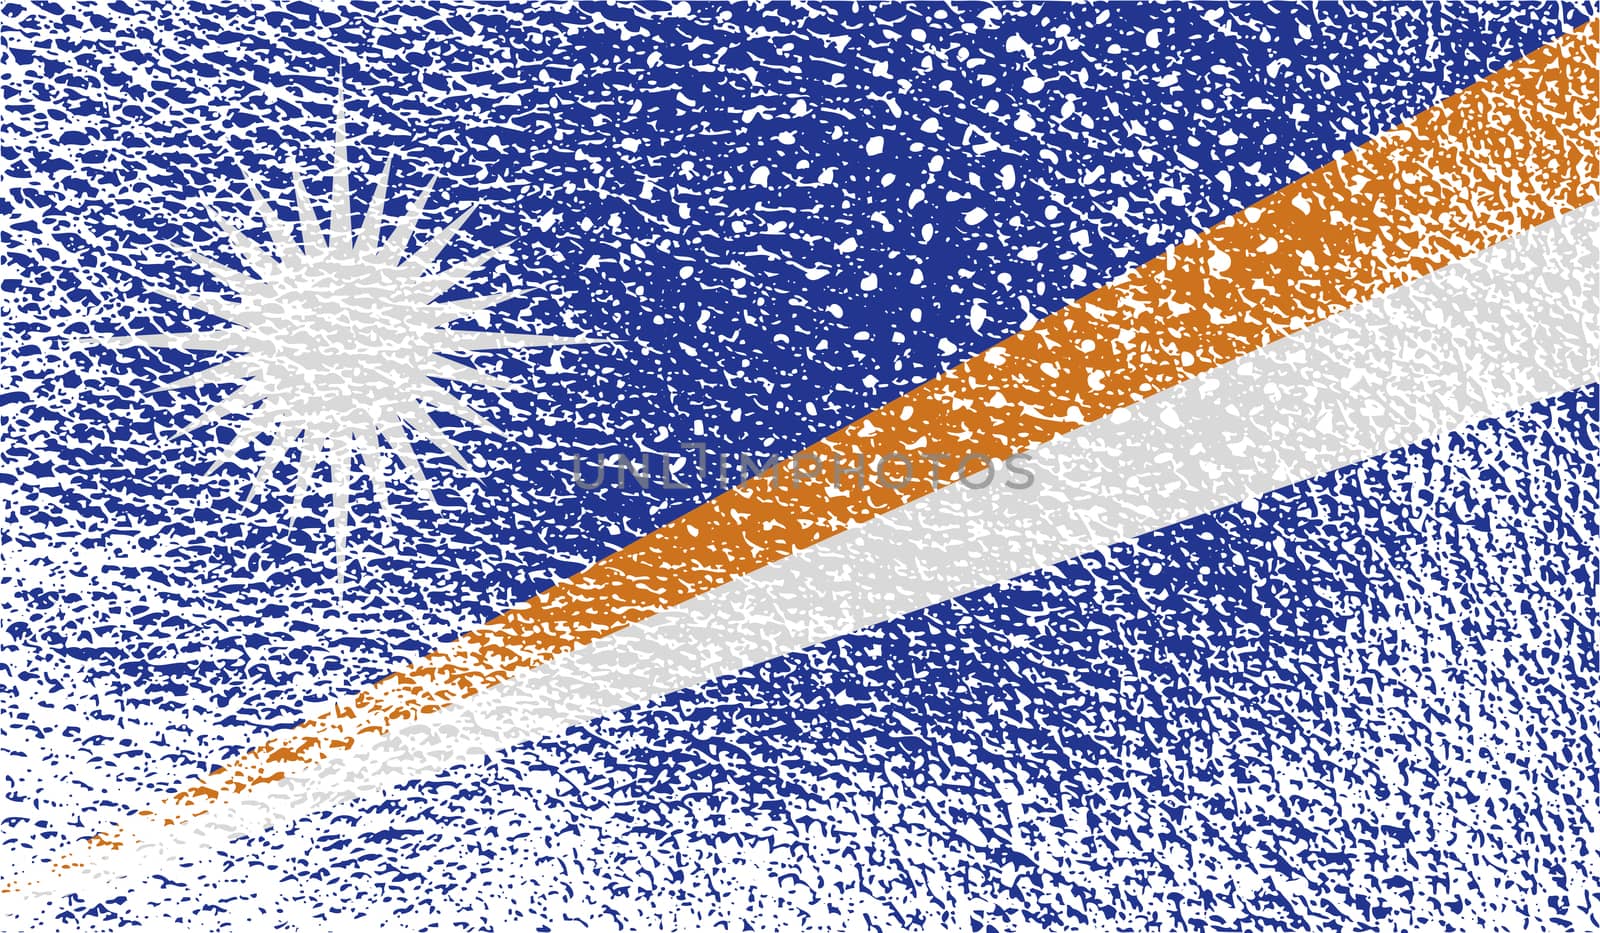 Flag of Marshall Islands with old texture.  illustration